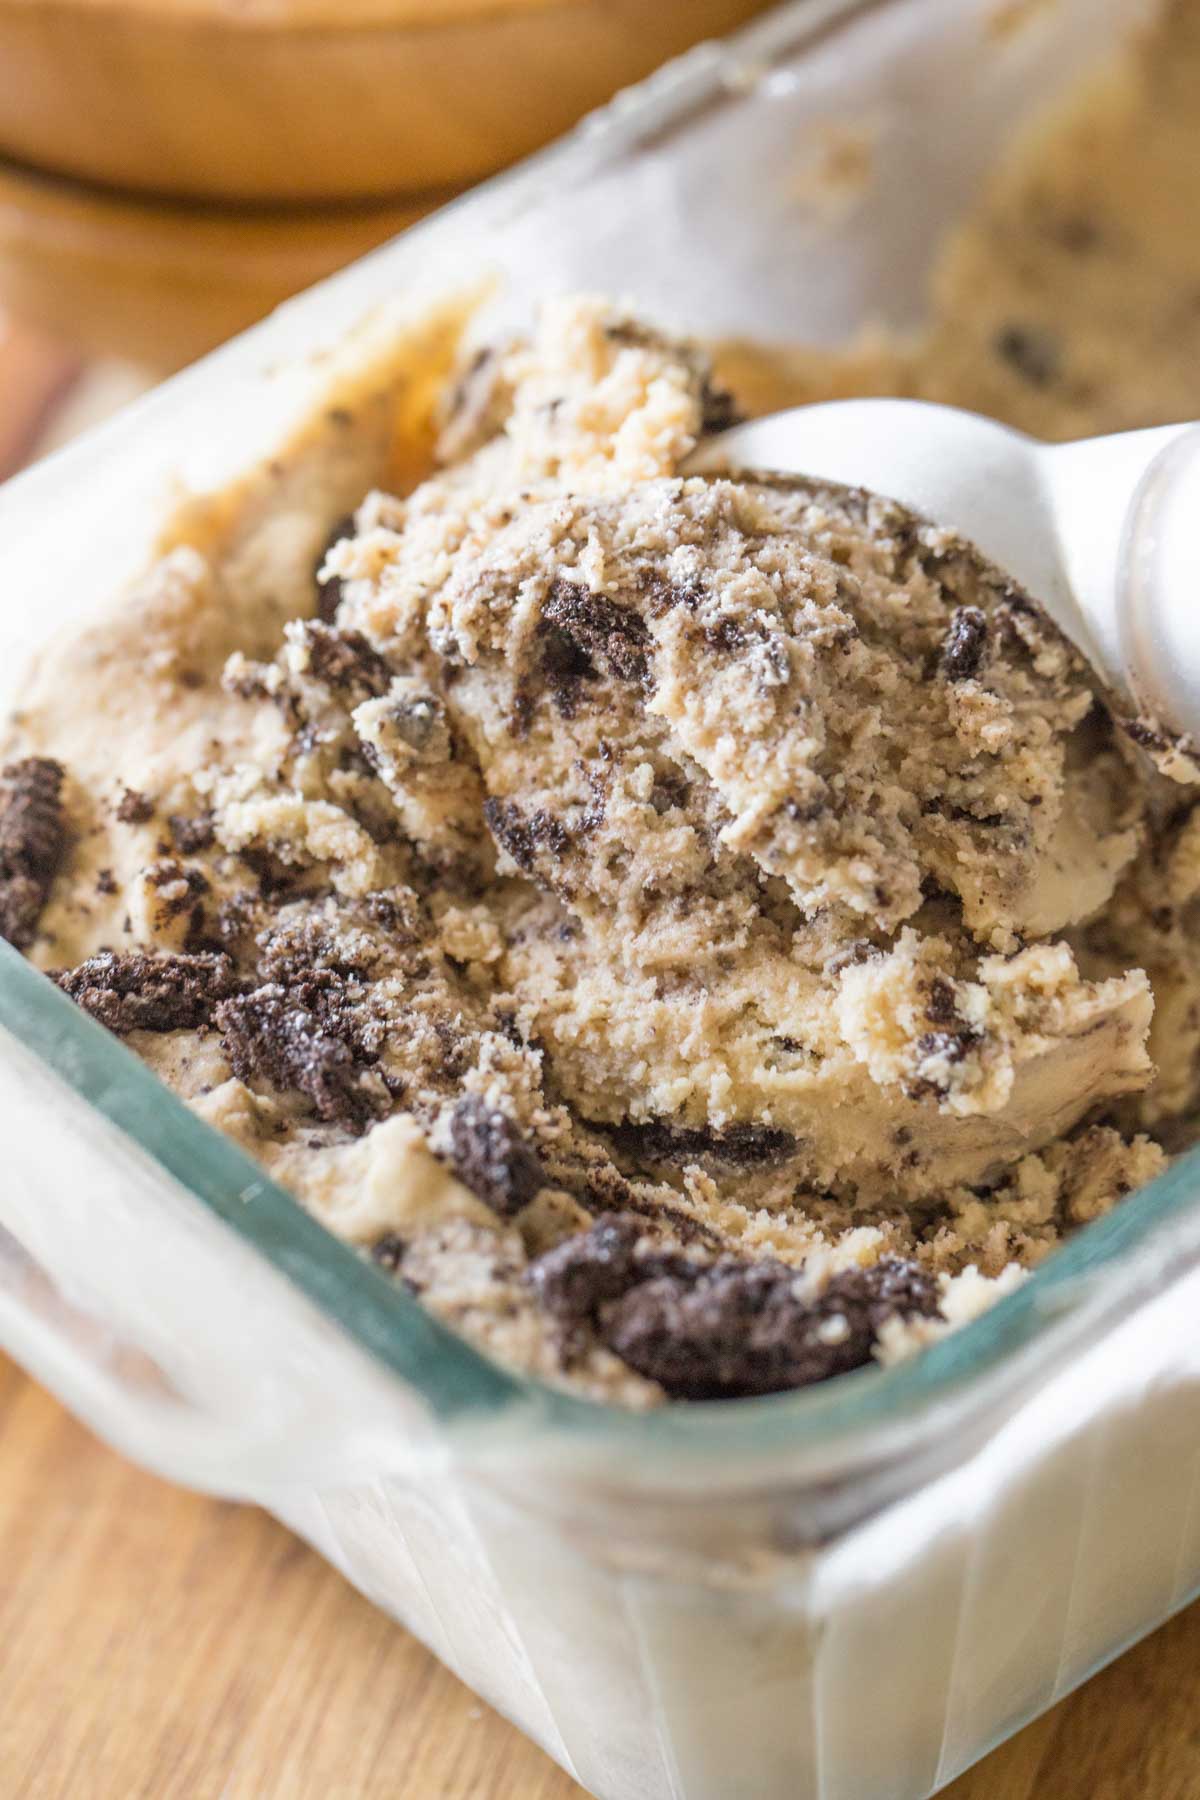 Close up shot of an ice cream scoop in a glass container of Peanut Butter Oreo Ice Cream.  